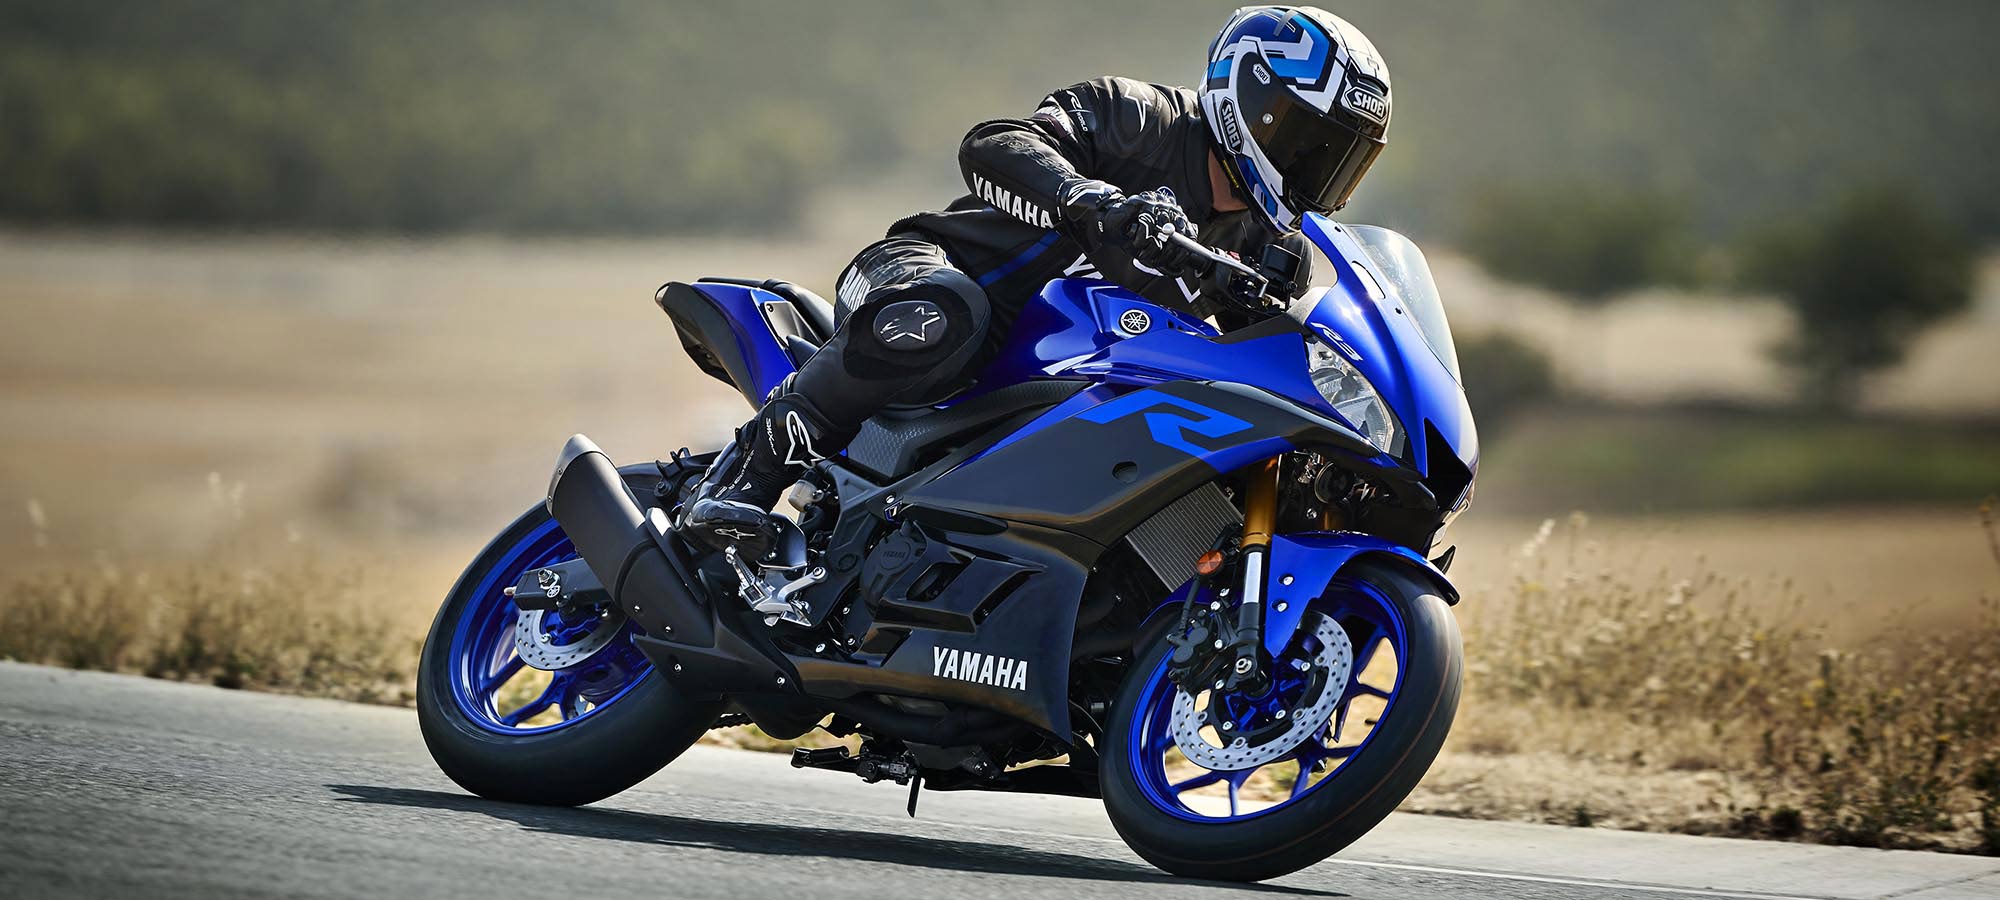 2019 Yamaha YZF-R3 to get massive overhaul; could feature USD forks,  variable valve actuation